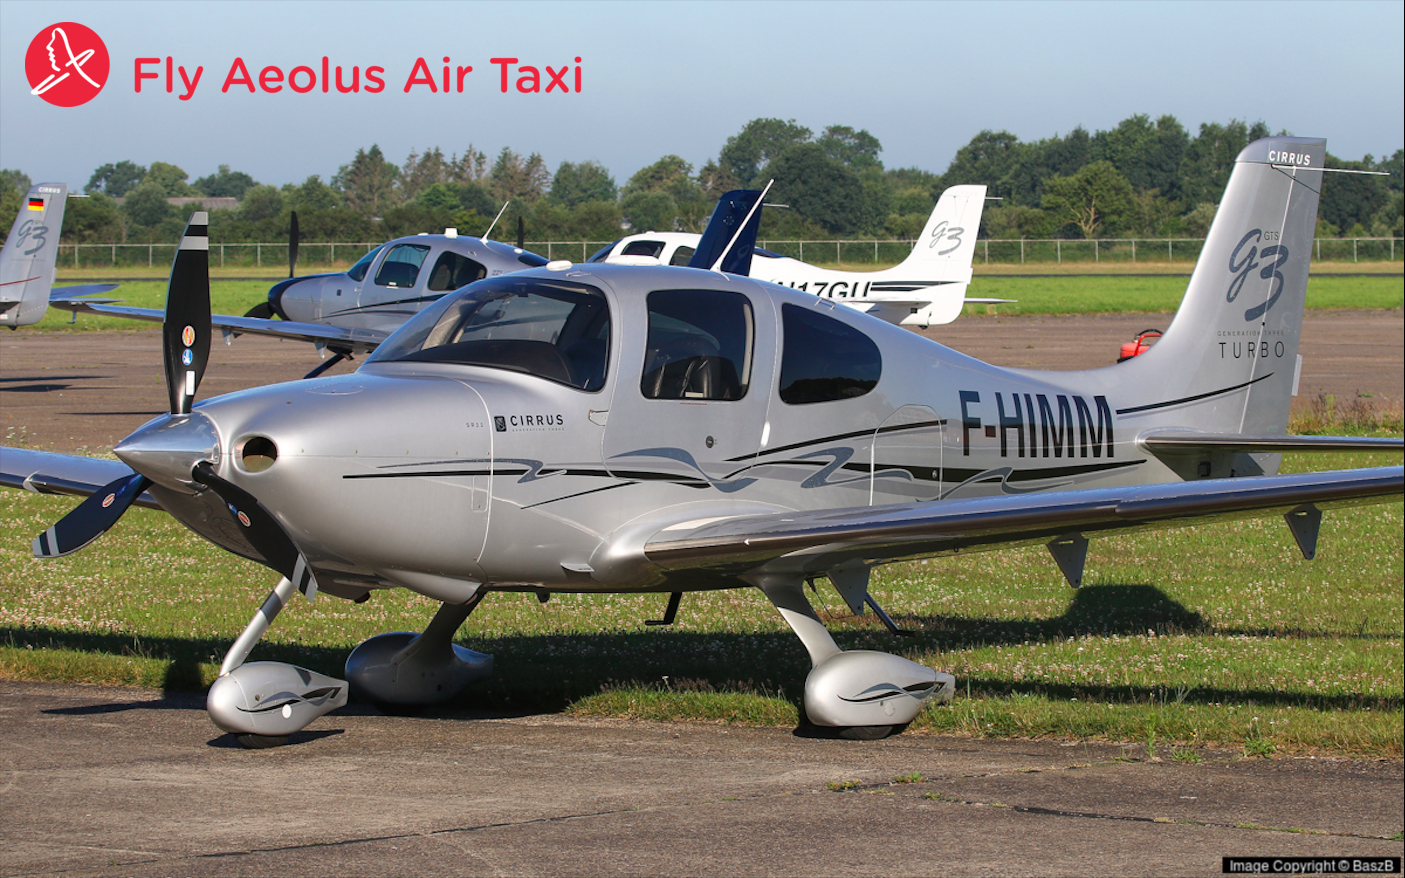 Fly Aeolus Adds 13th Cirrus Aircraft In Lille France Fly